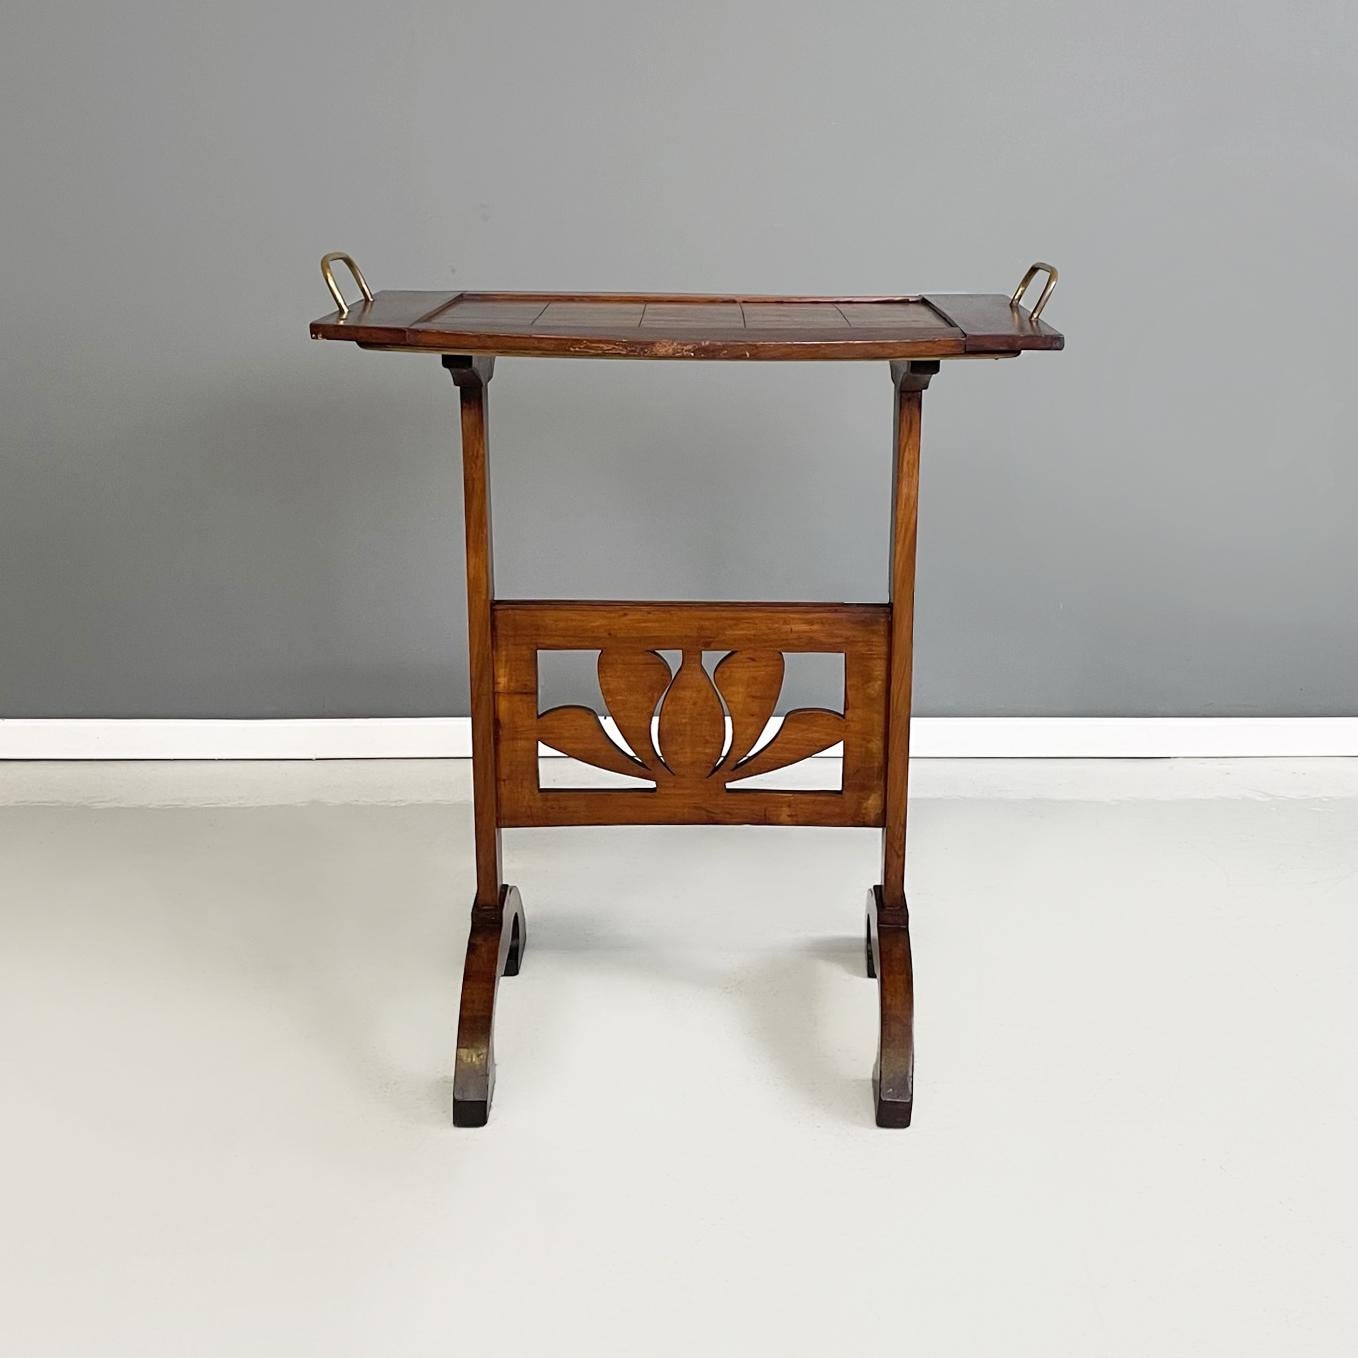 Italian antique Coffe or side table in wood and brass, 1900s
Work table in solid wood and brass. The top has a square shape with two brass rod handles. The structure has two vertical slats with a floral decoration in the middle. Finely crafted feet.